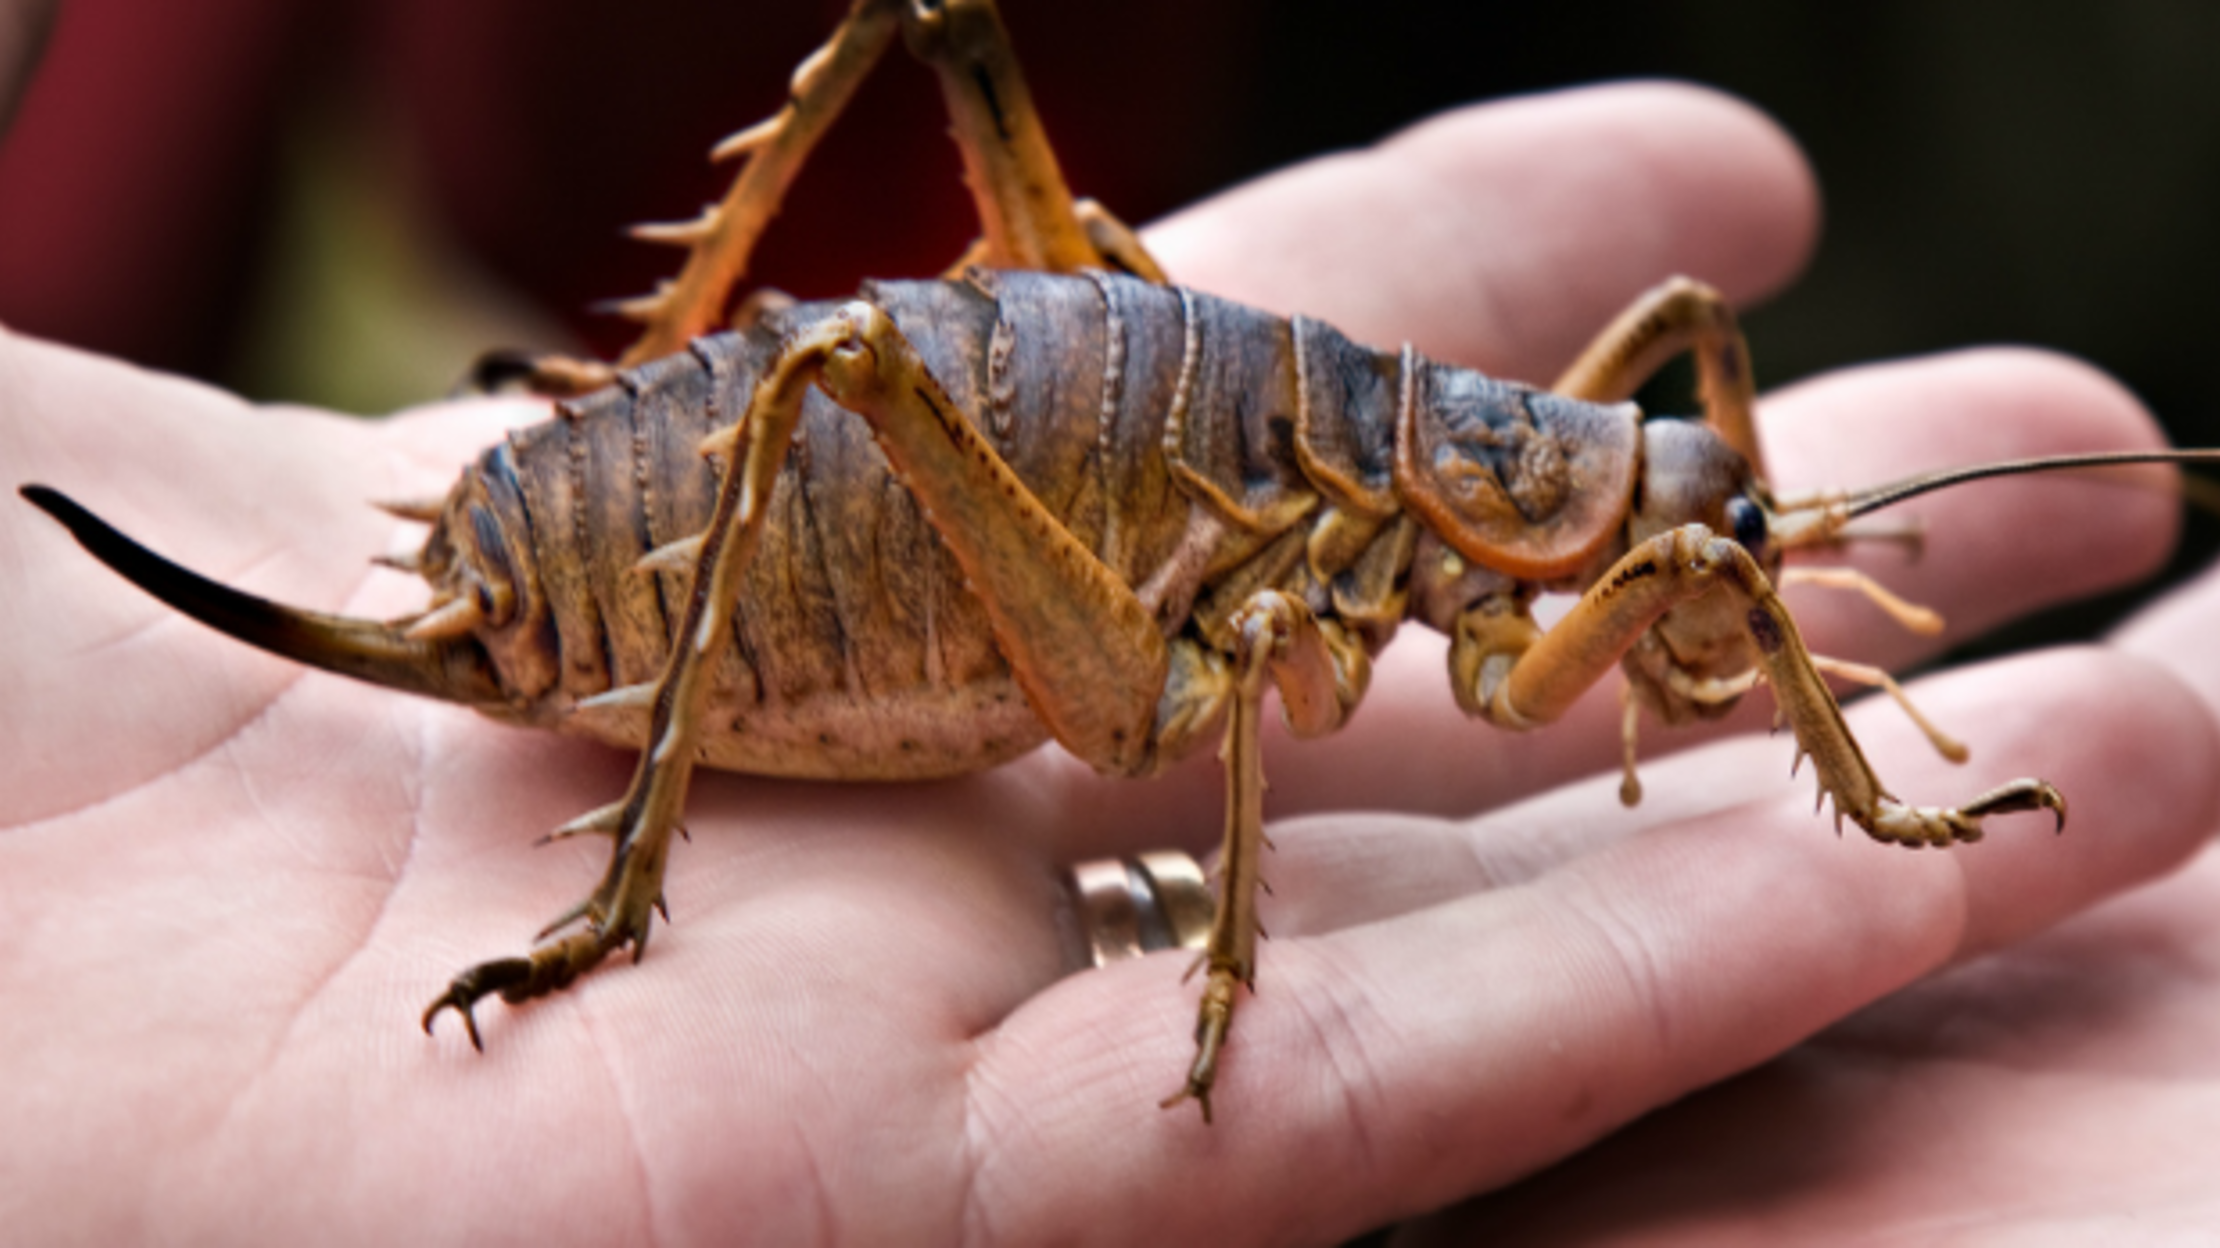 10 Intense Facts About The Giant Weta Mental Floss,Italian Parsley Recipe